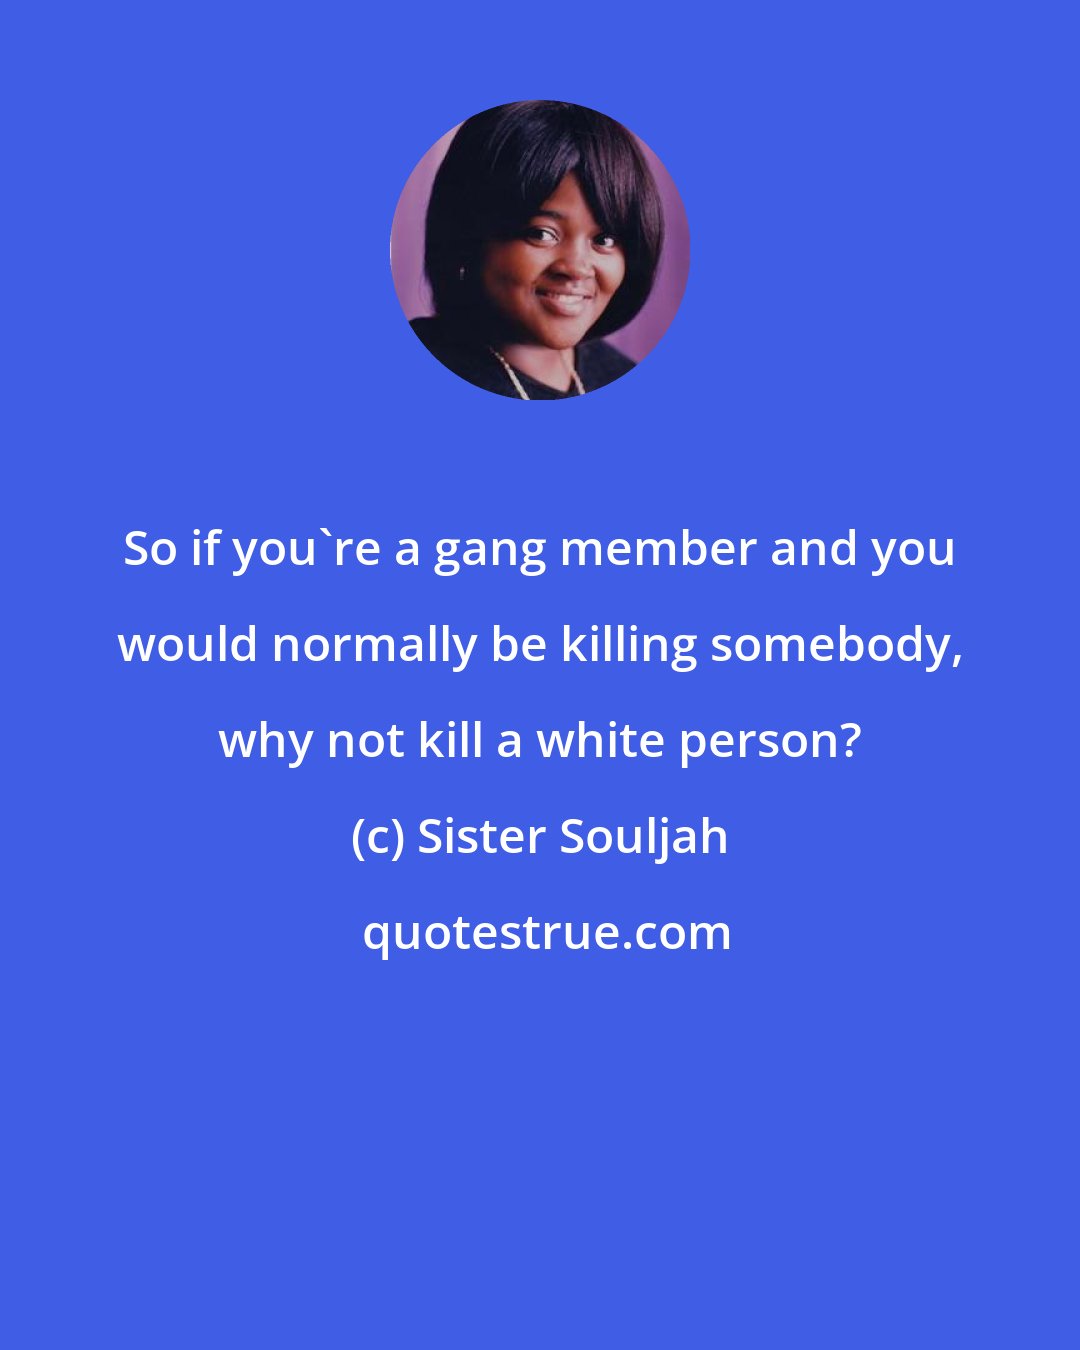 Sister Souljah: So if you're a gang member and you would normally be killing somebody, why not kill a white person?